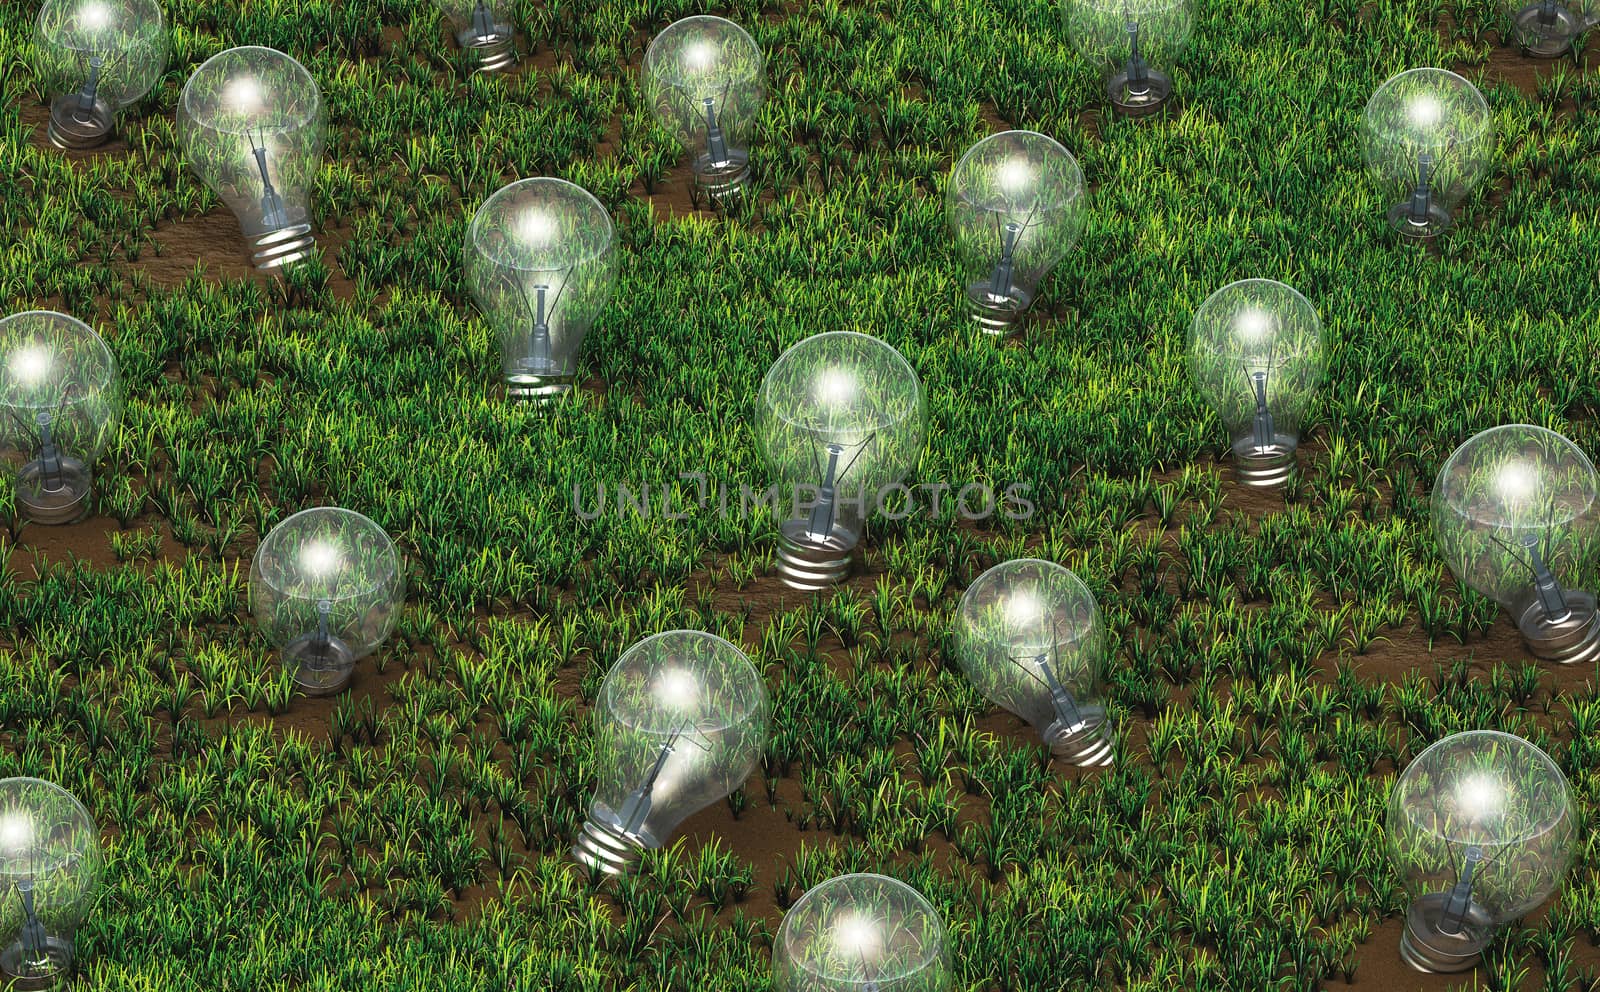 some unlit light bulbs with different size are growing as ideas on a grassy soil like plants